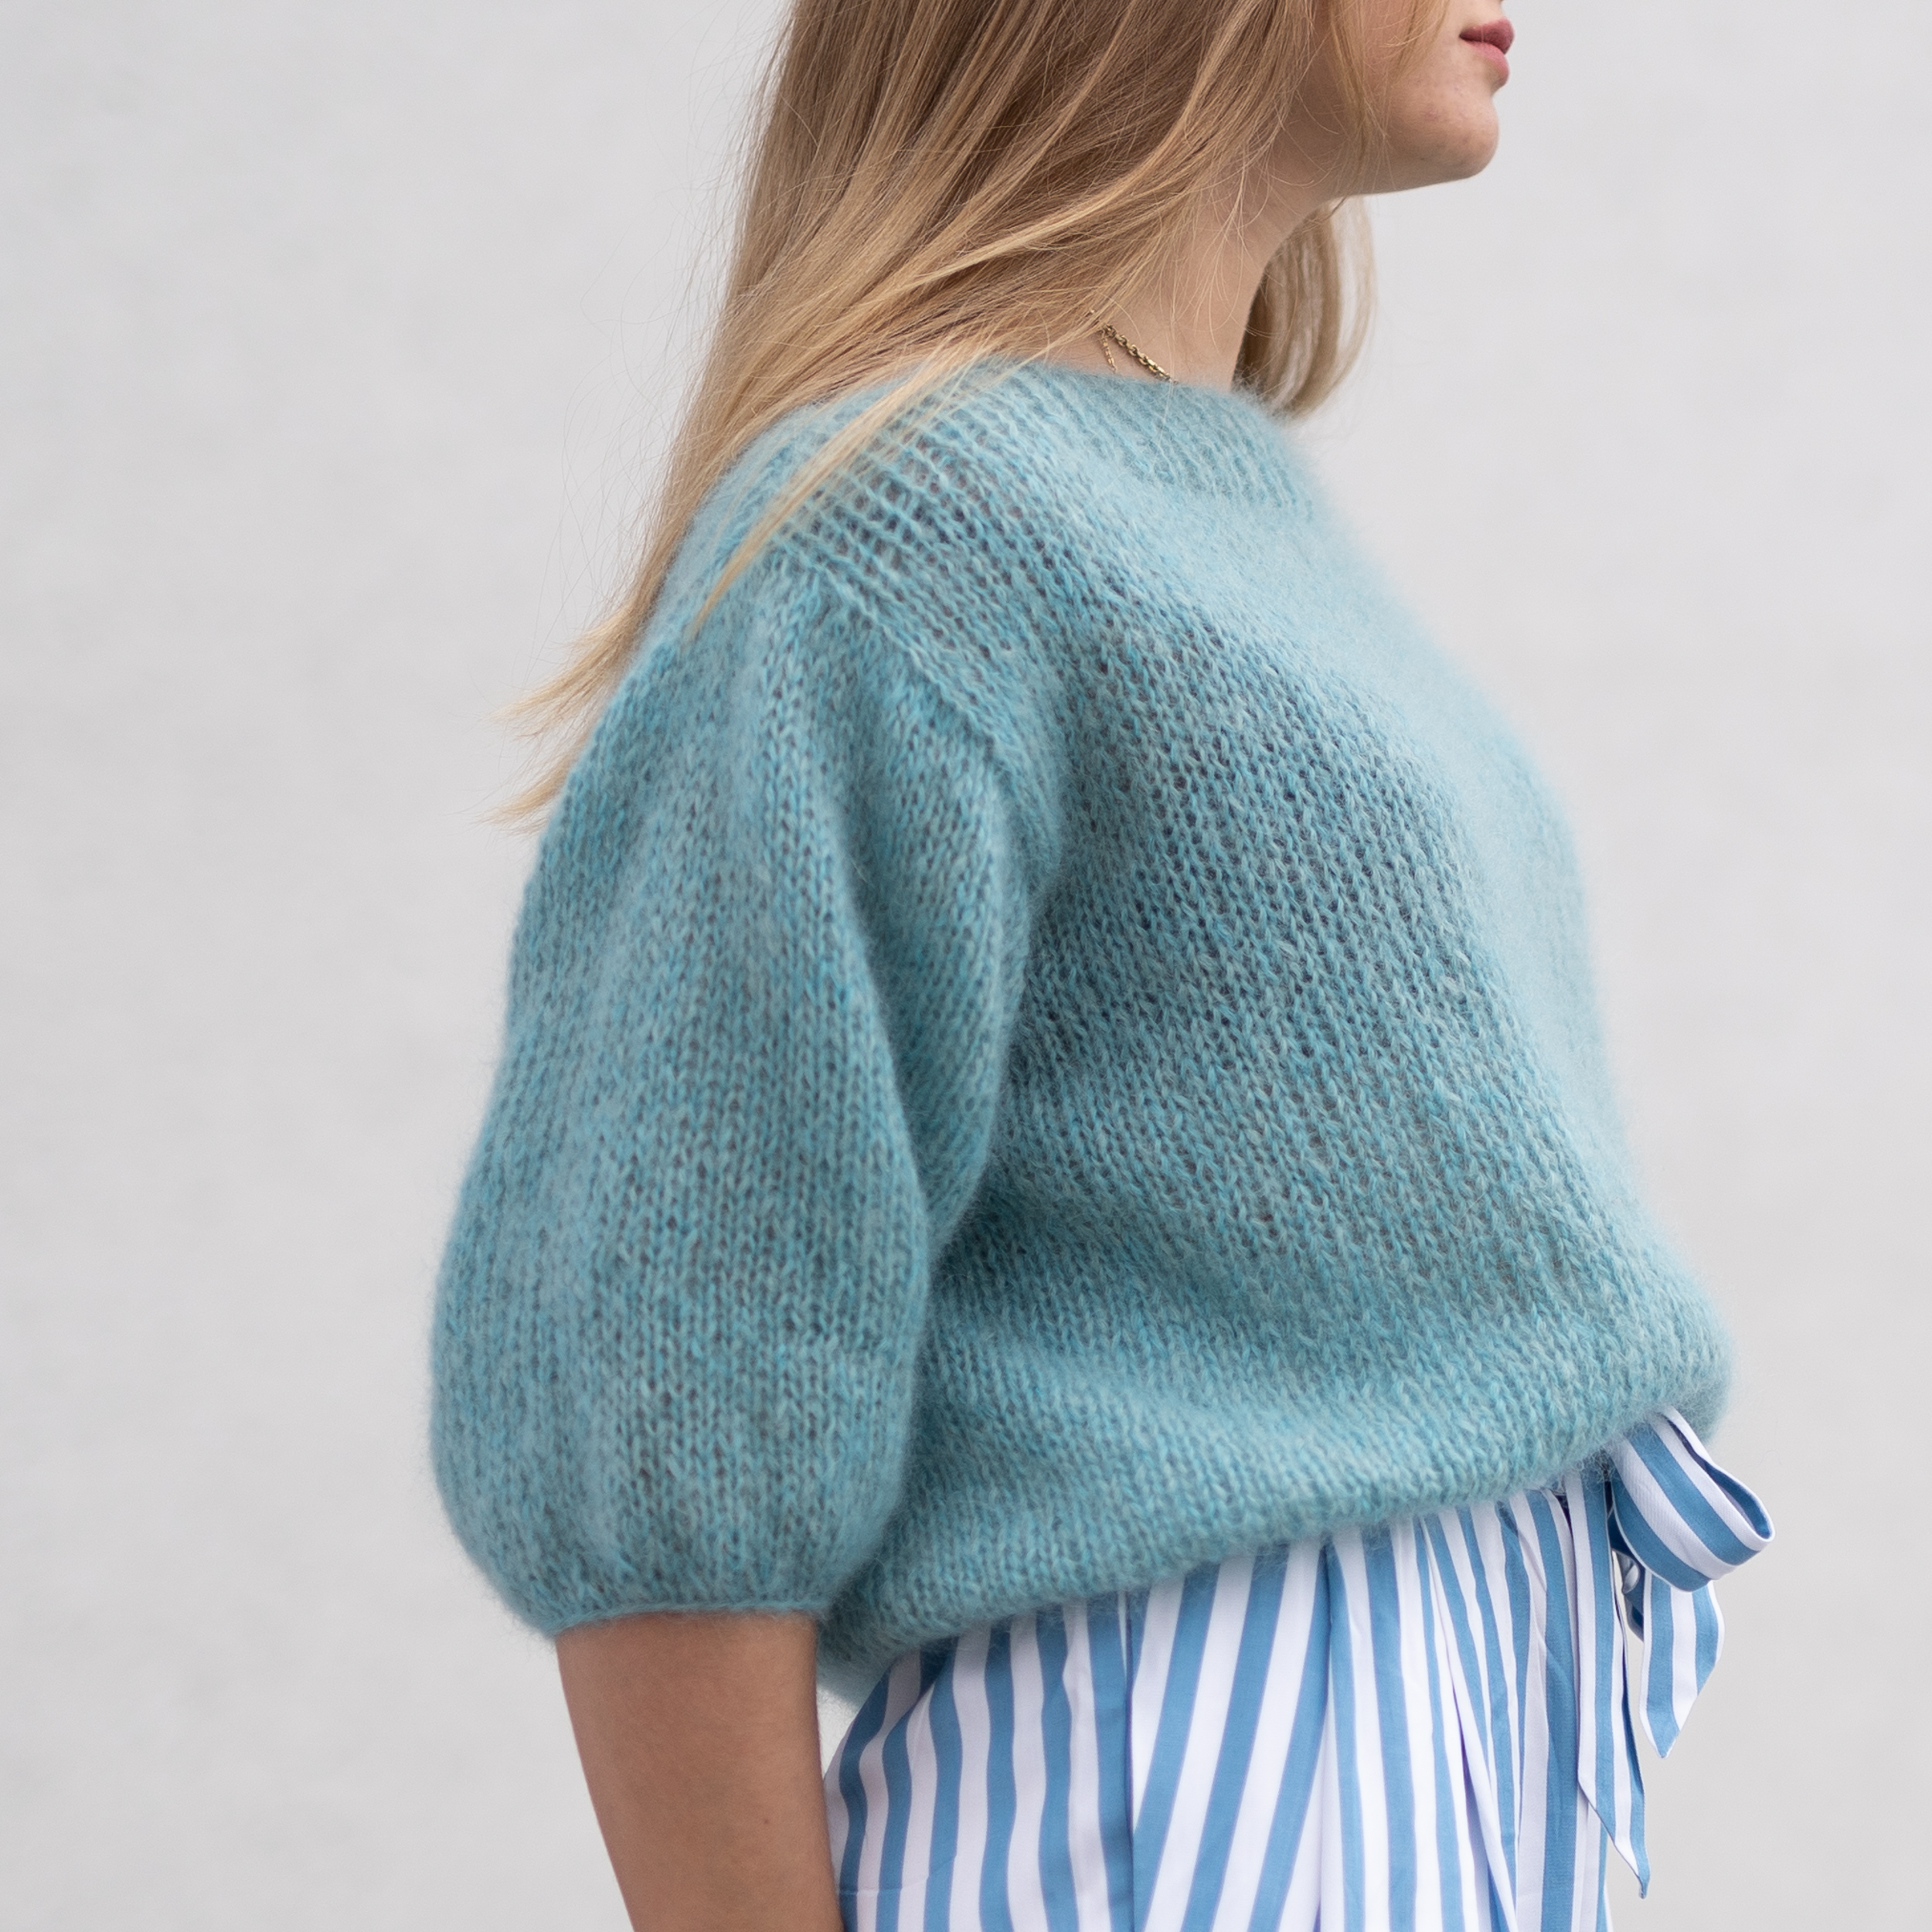 Like a Cloud sweater | Mohair sweater knitting kit- by HipKnitShop